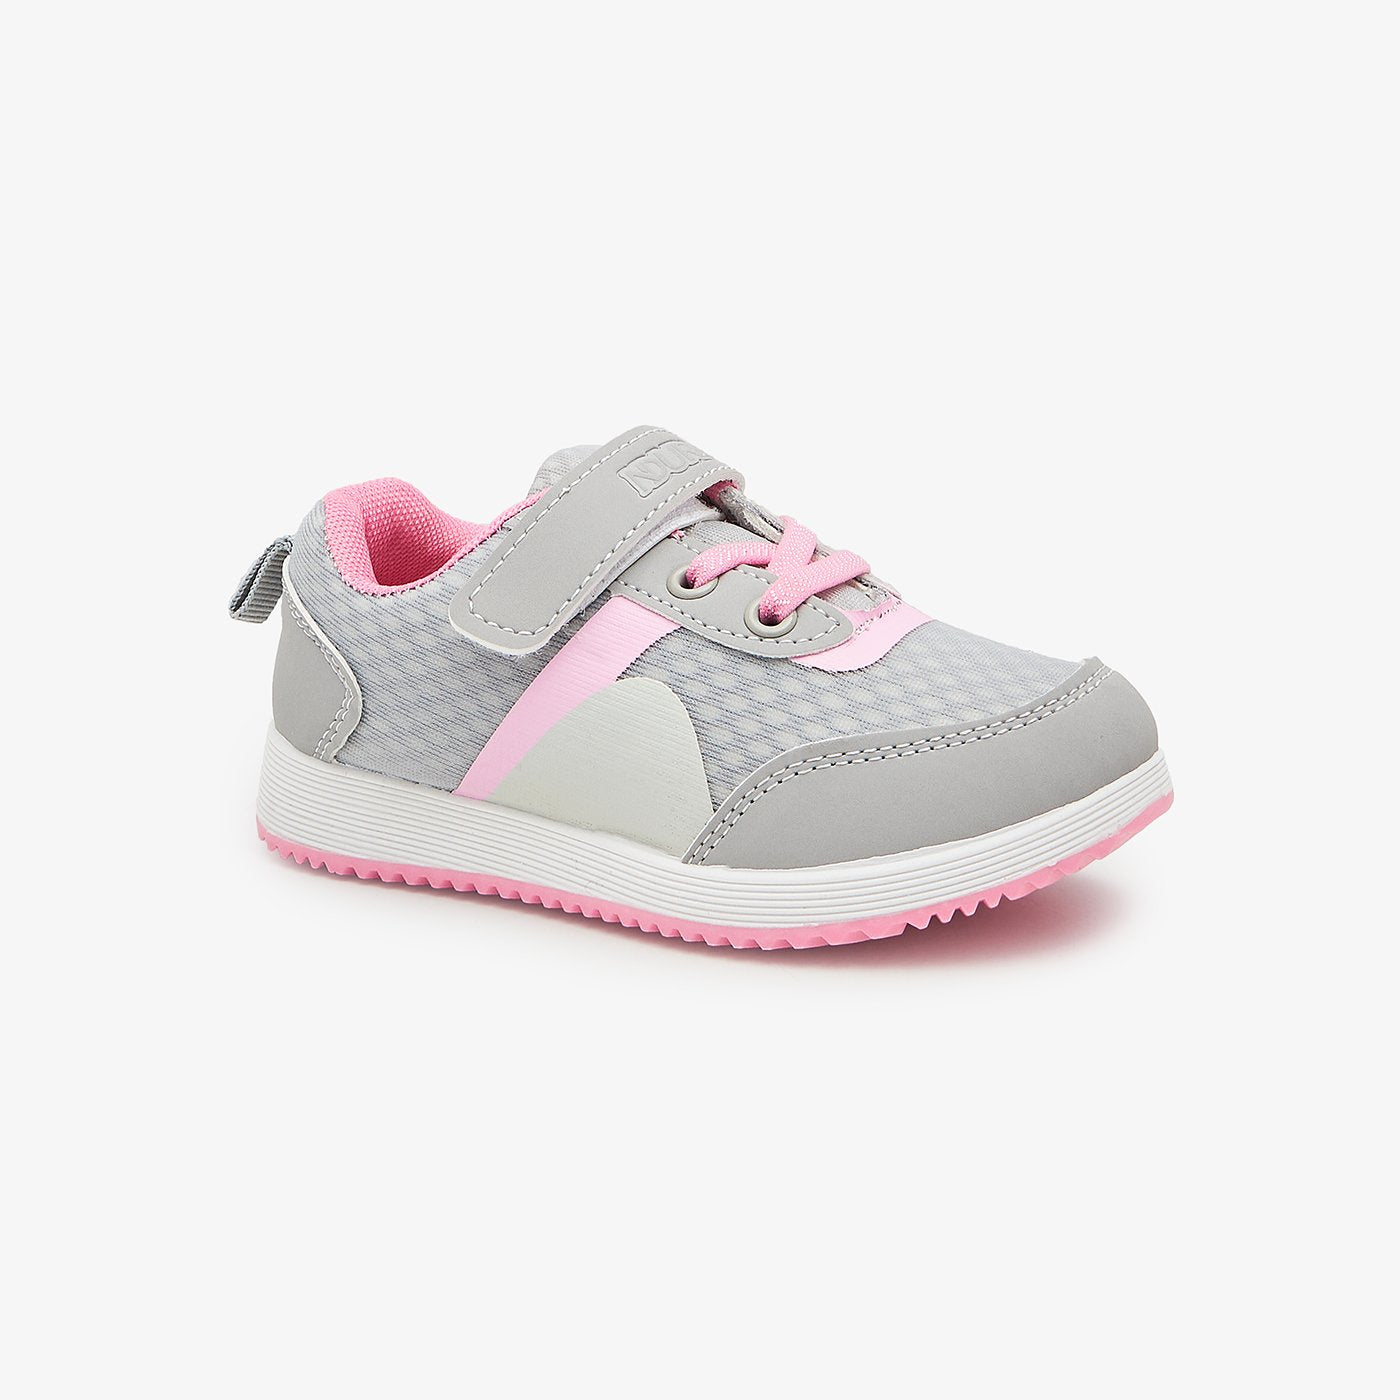 NDURE Athletic Shoes for Girls